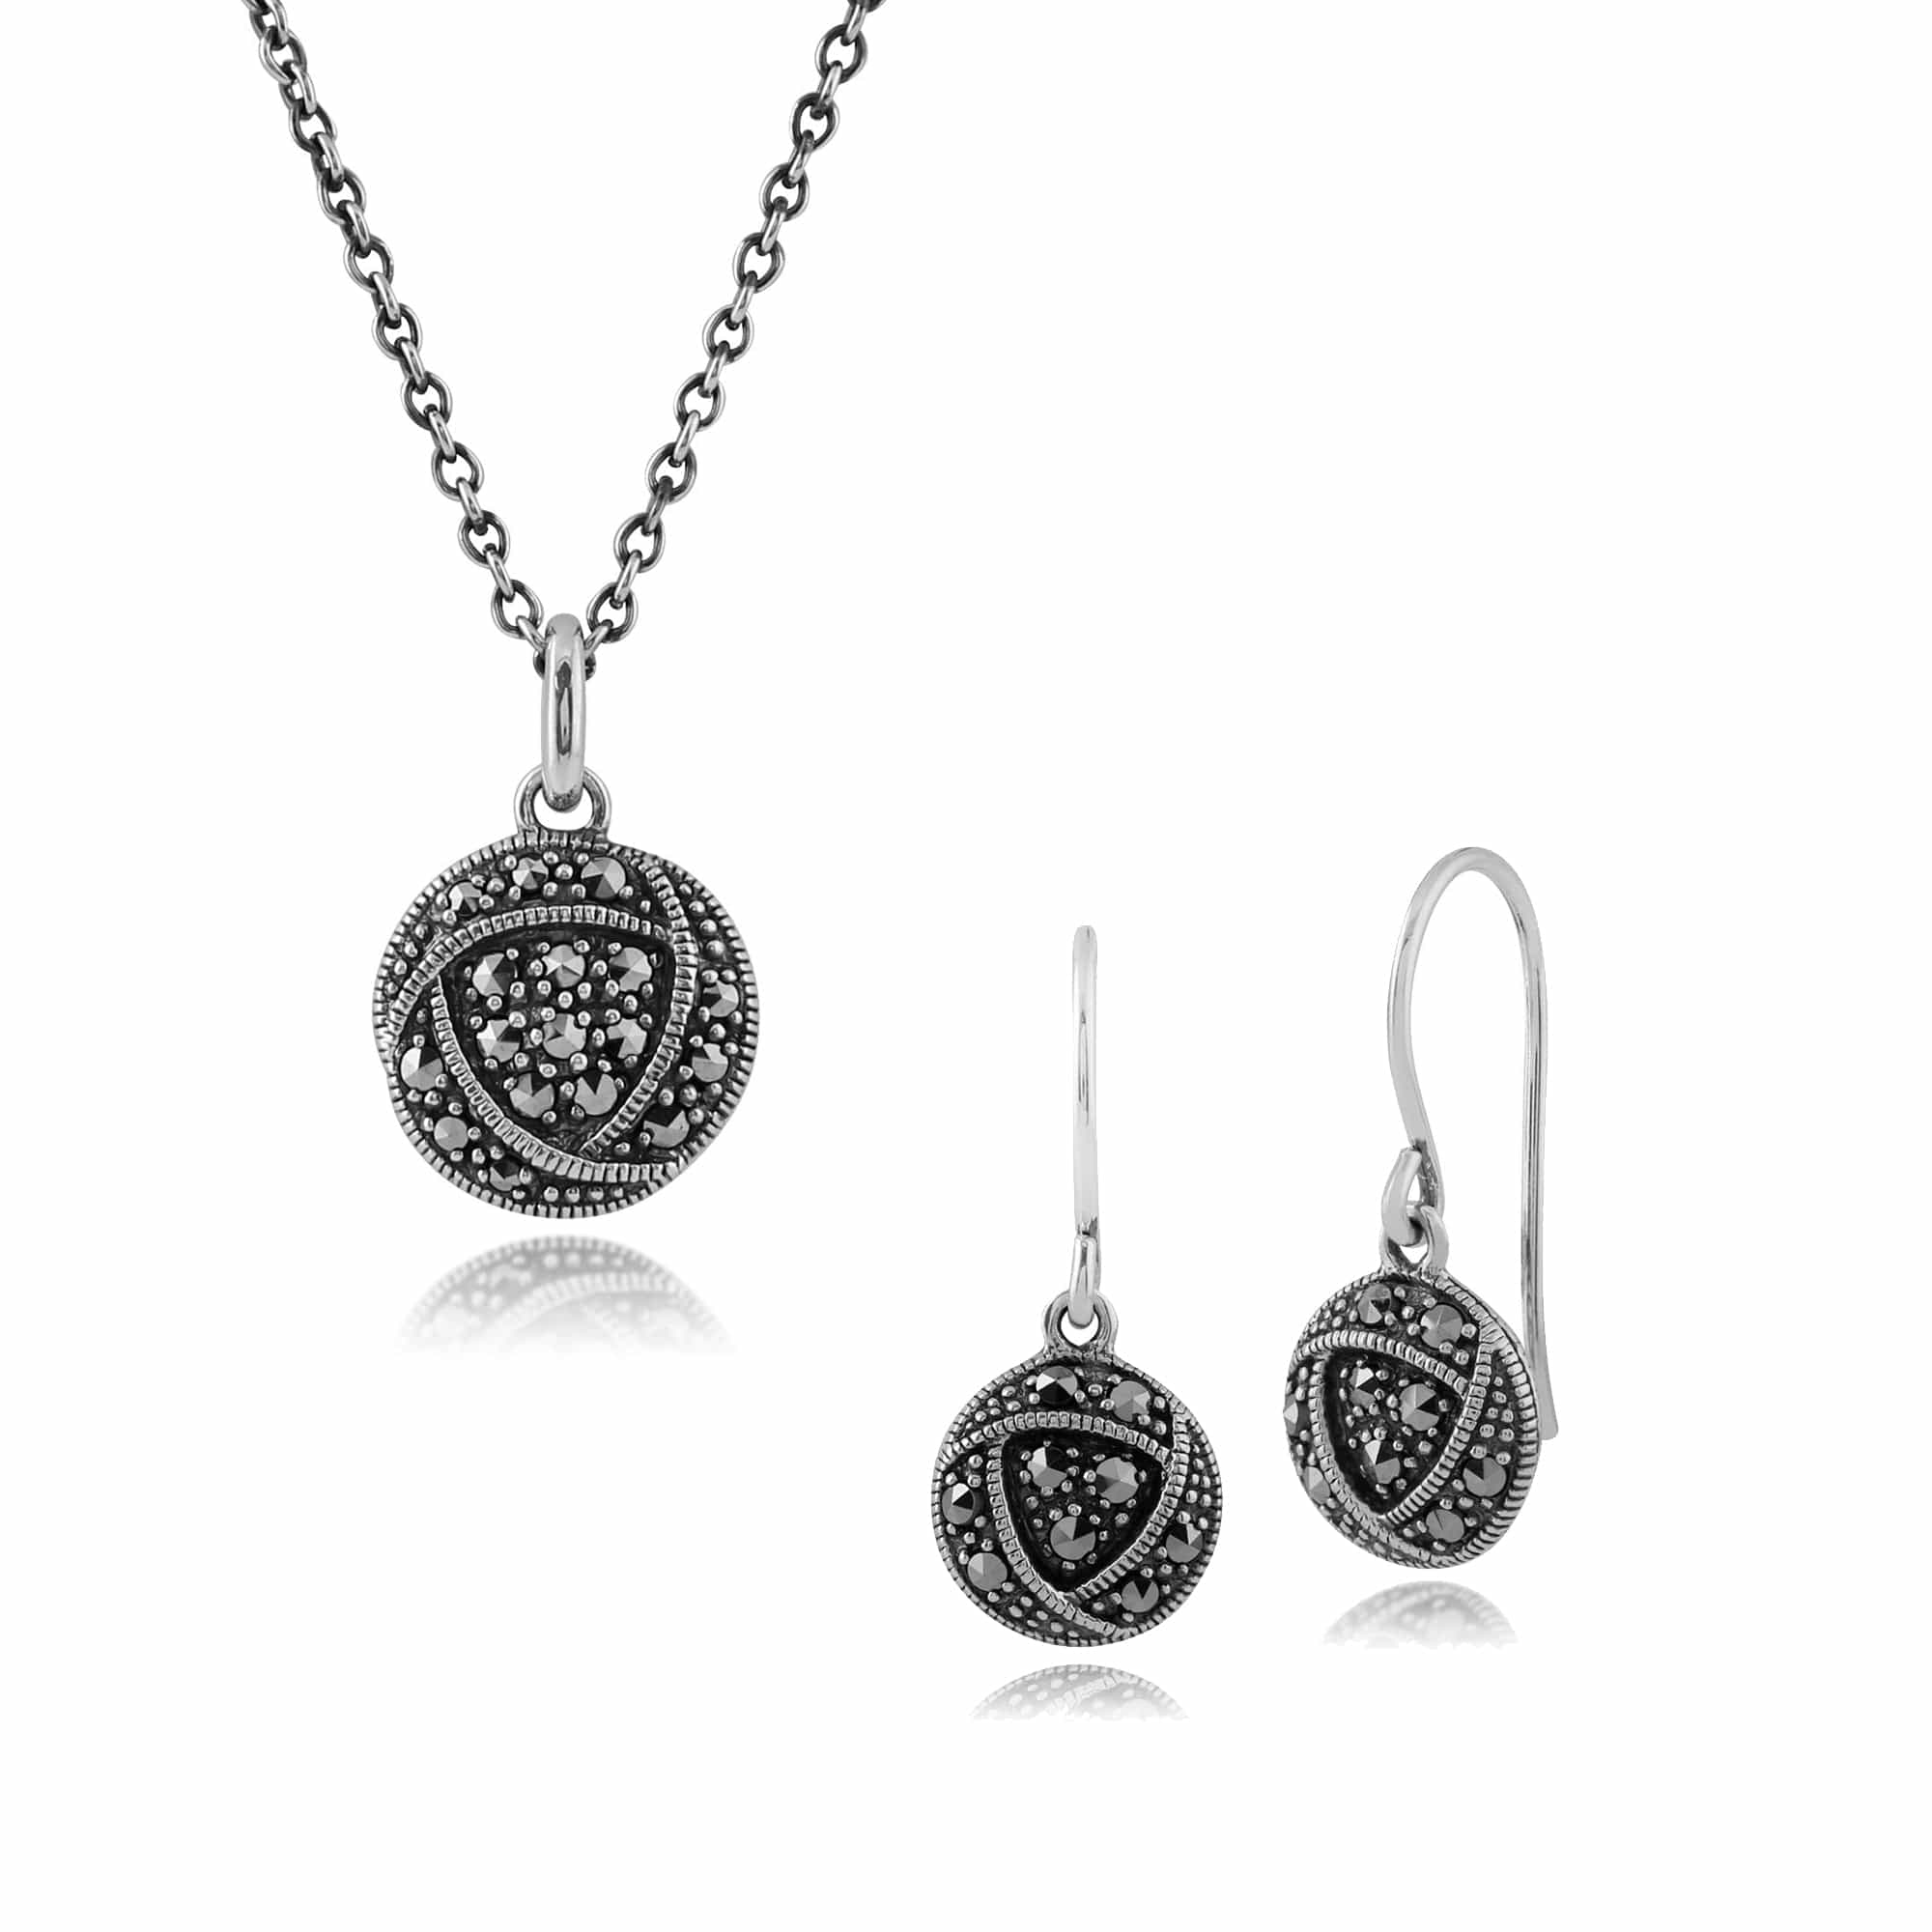 214E840901925-214P295501925 Rennie Mackintosh Inspired Round Marcasite Glasgow Rose Drop Earrings & Pendant Set in 925 Sterling Silver 1